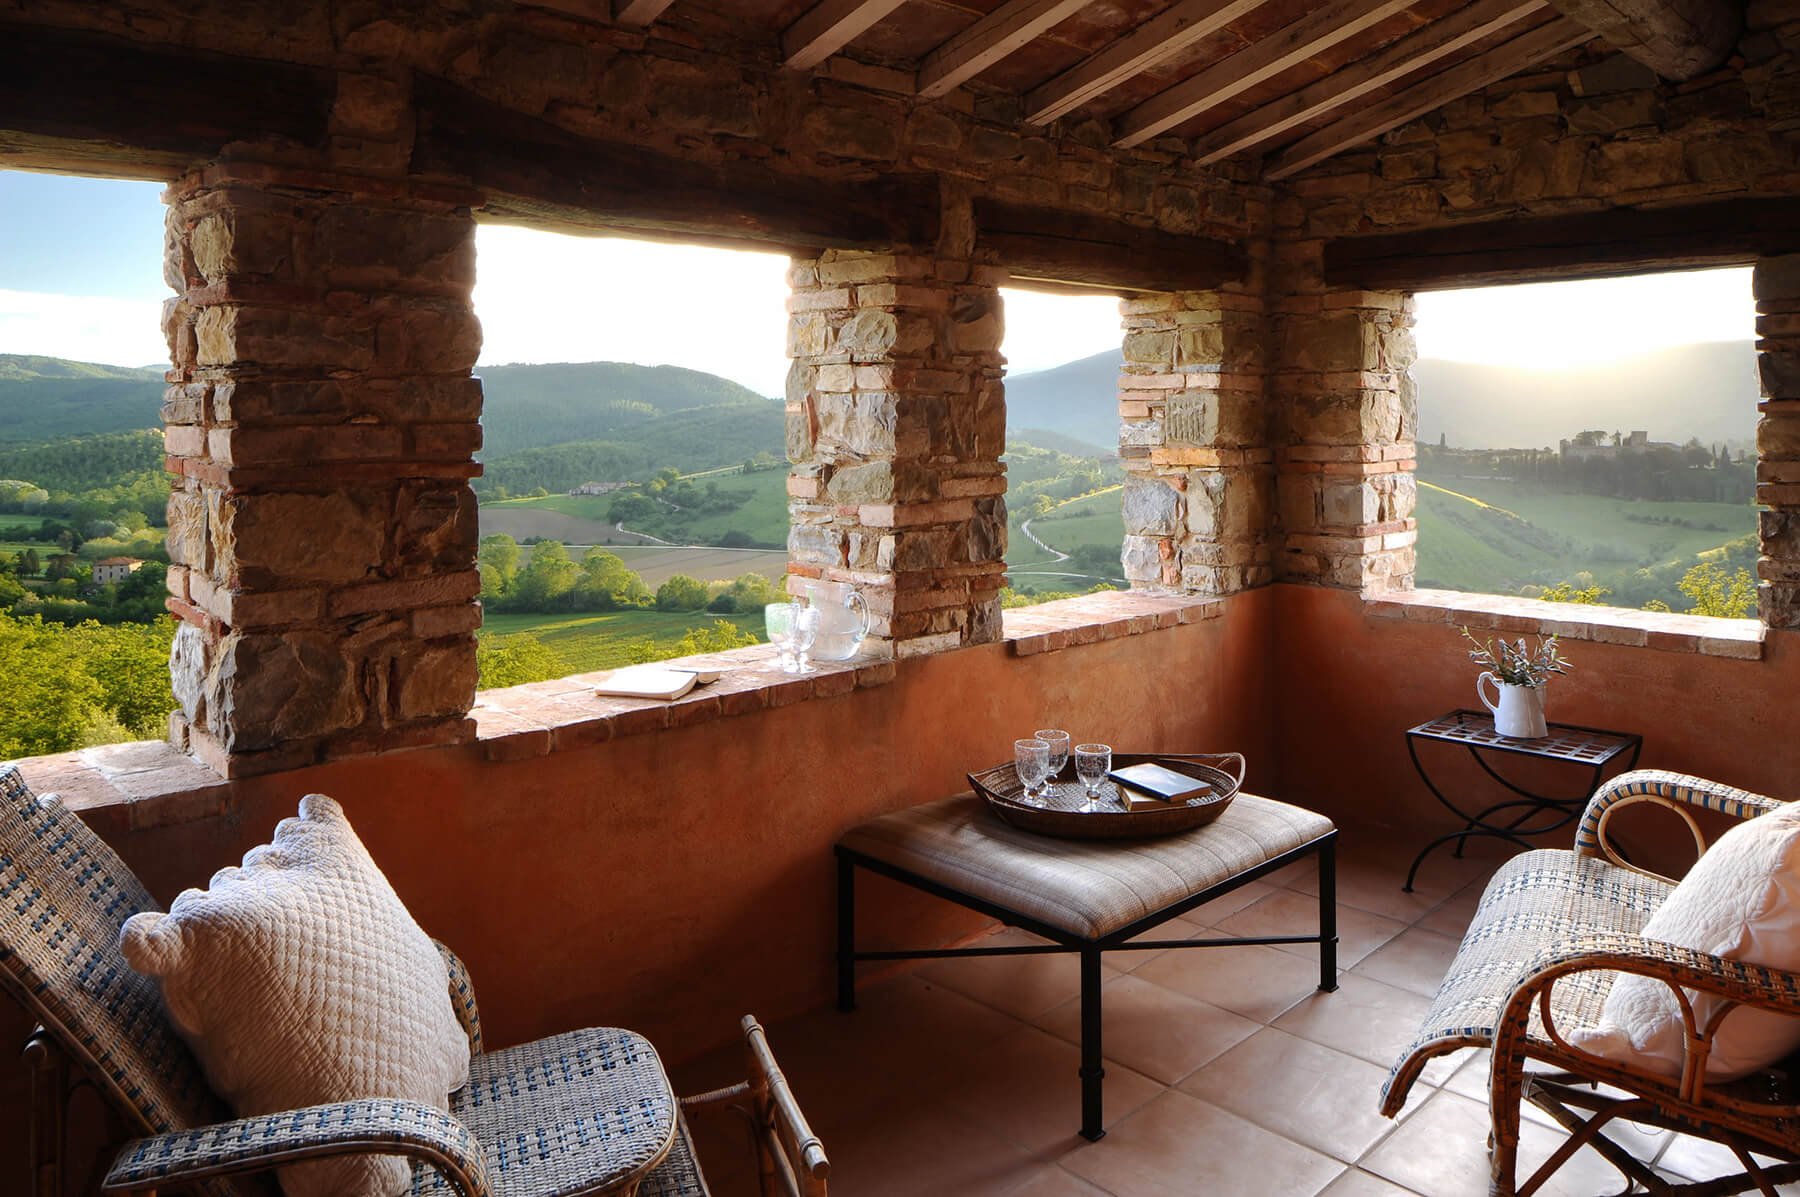 Francis York This Boutique Farmhouse in the Umbrian Hills is Available as a Luxury Villa Rental 18.jpg